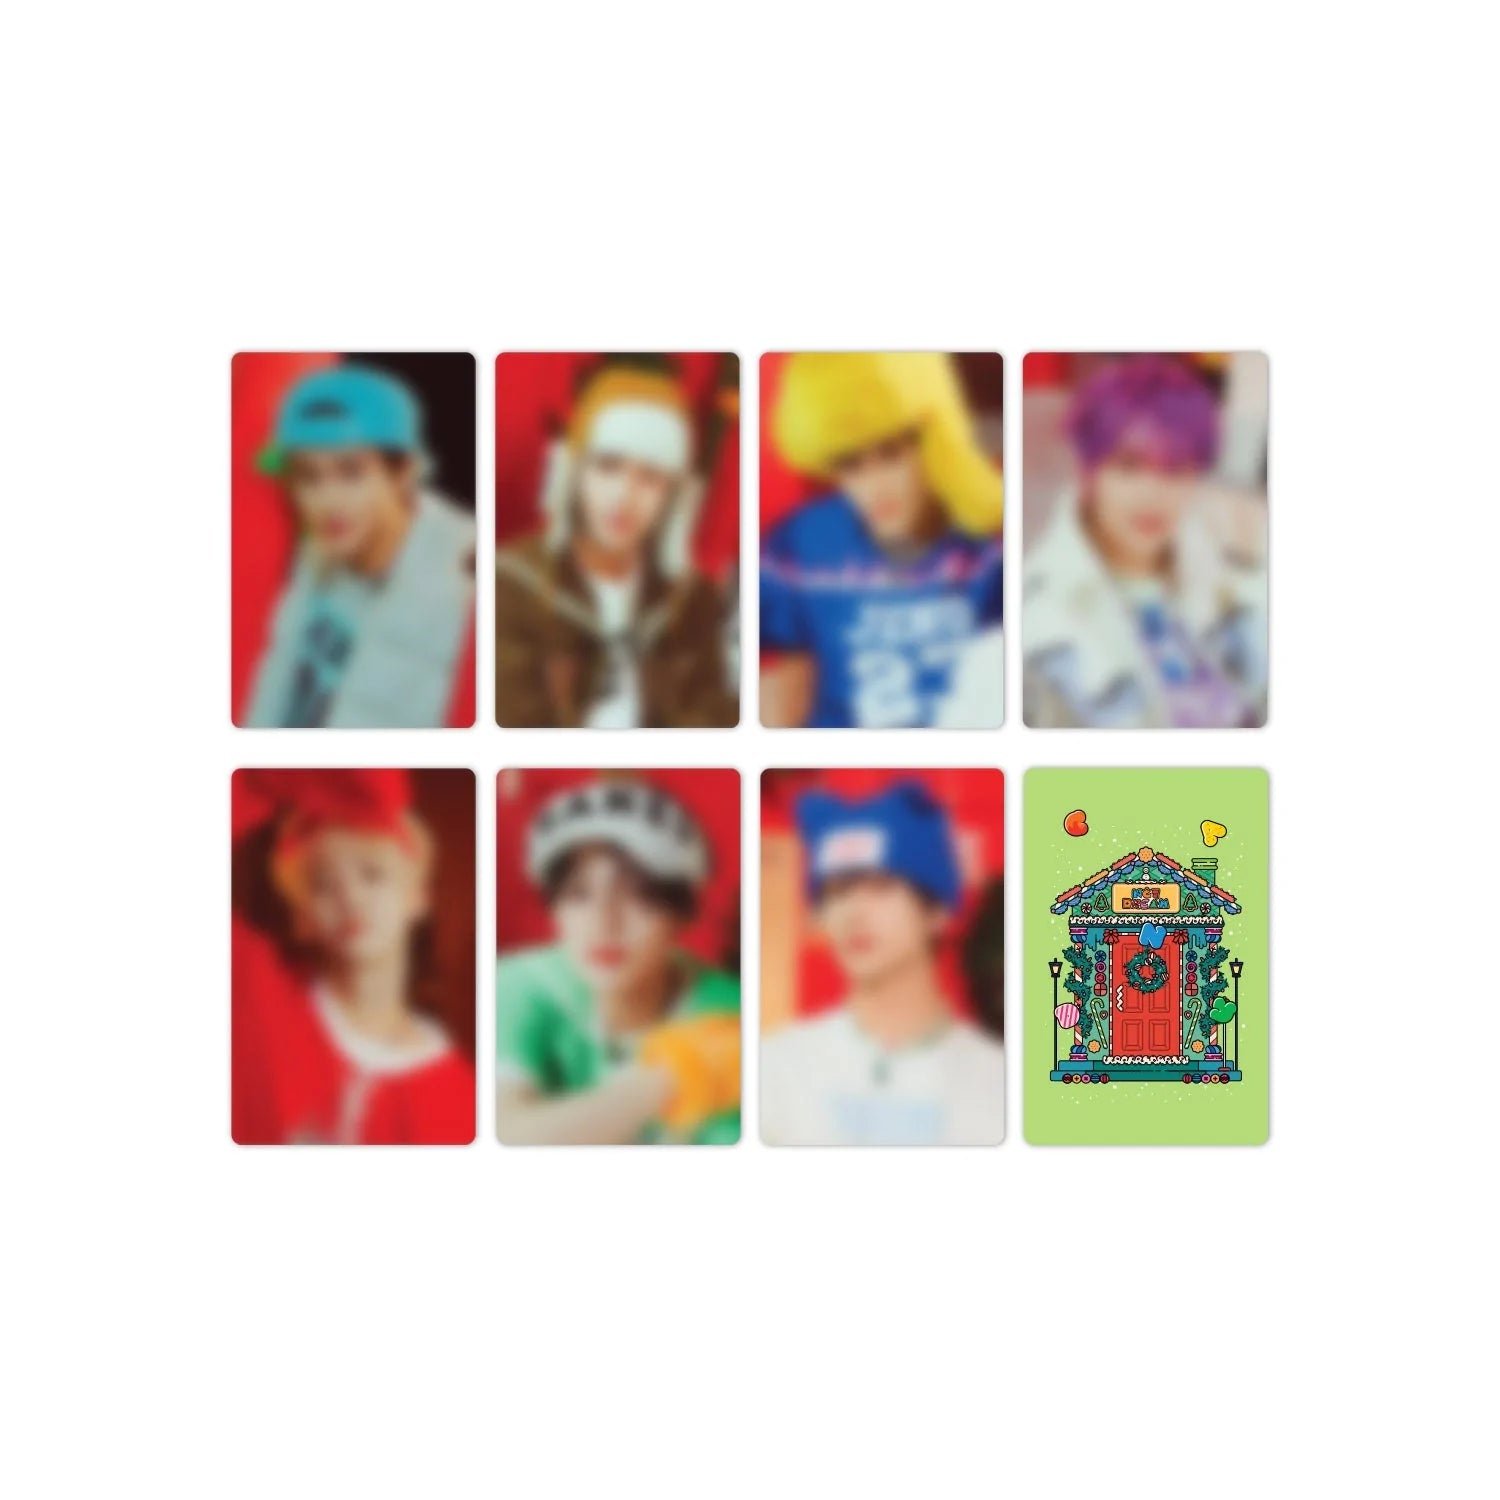 [SGS] NCT DREAM Winter Special Mini 'Candy' Waffle Robe + 1 SGS Exclusive Photo Card